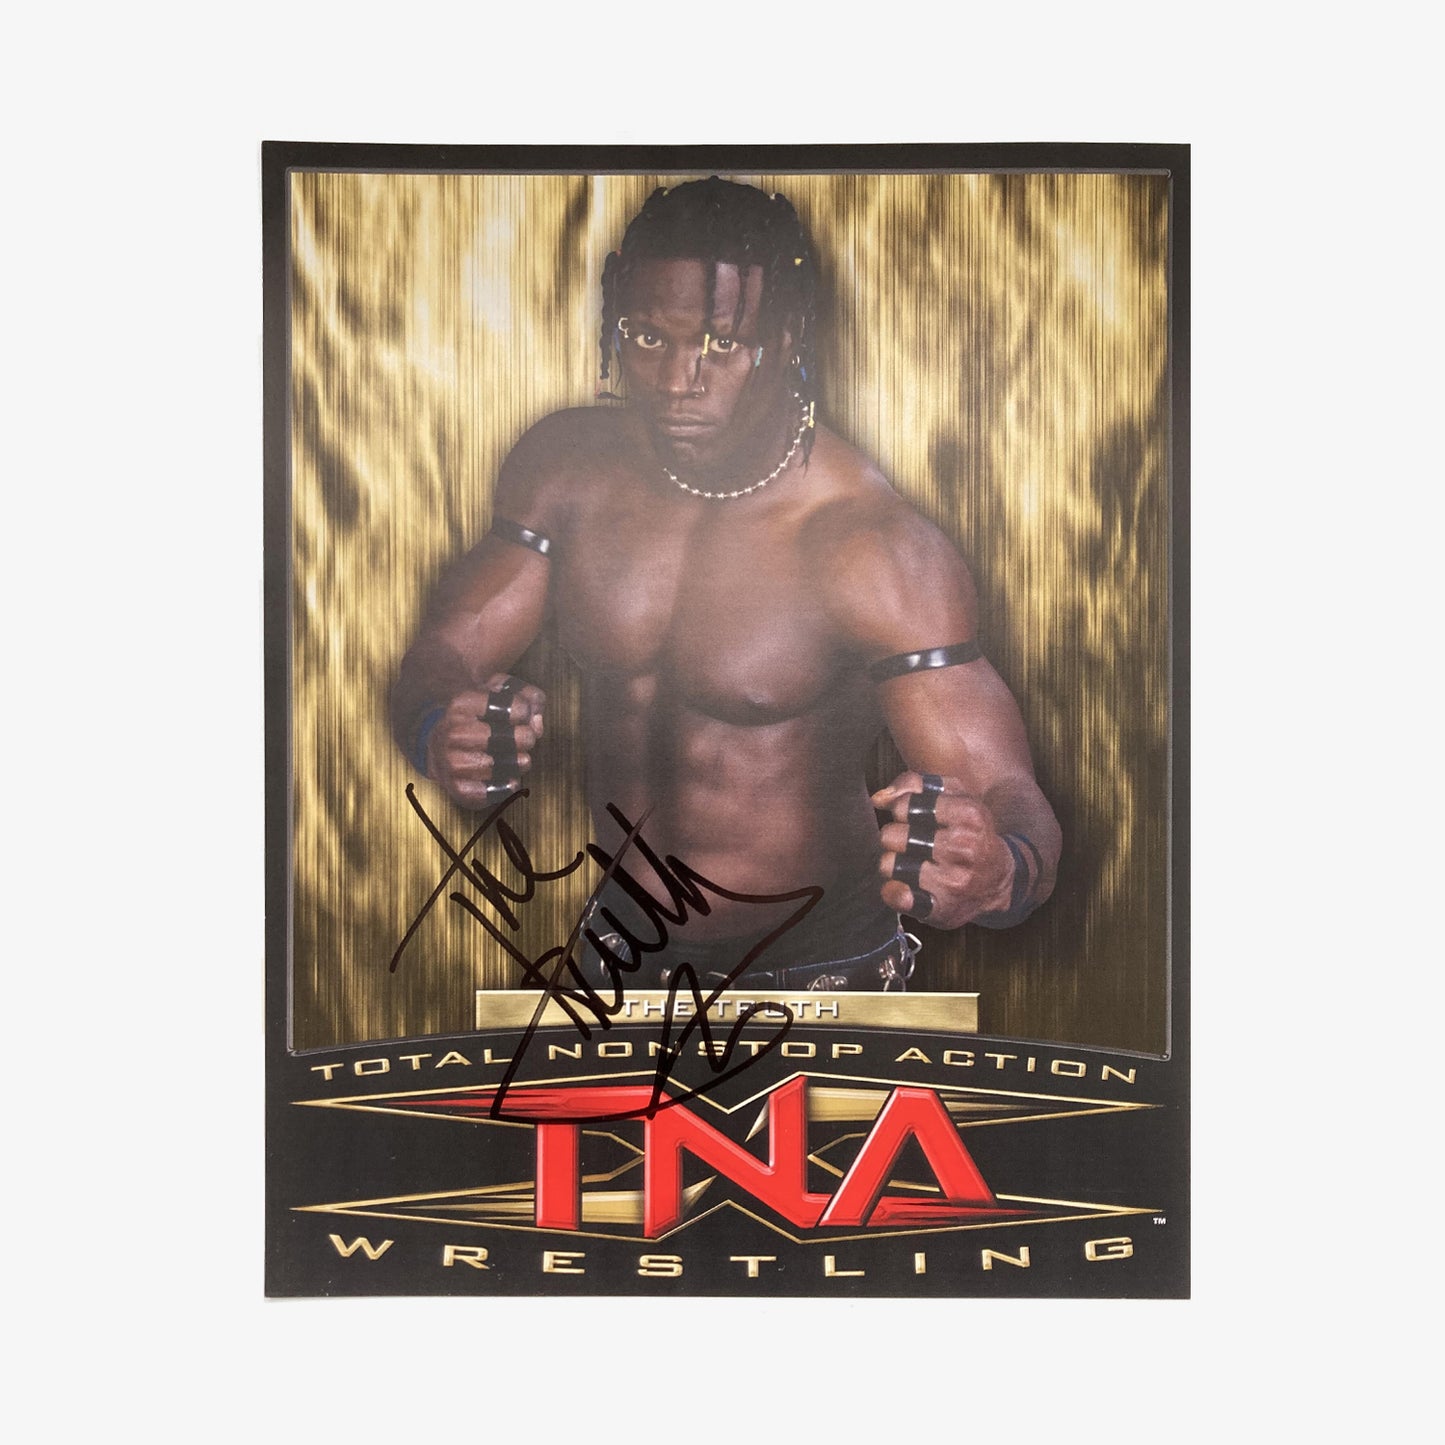 Ron "R-Truth" Killings Autographed 8x10